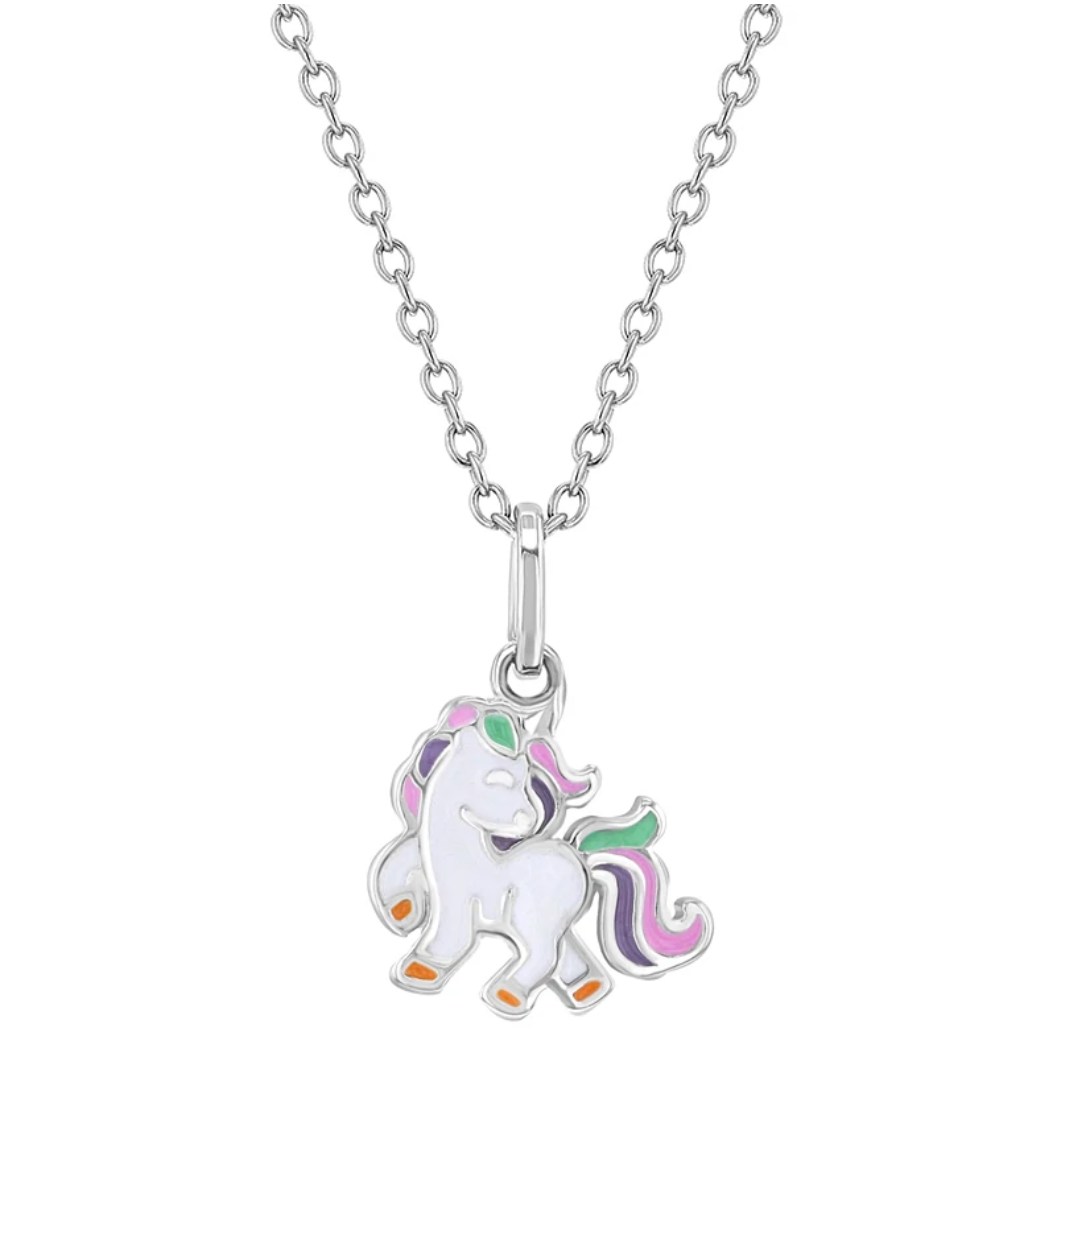 925 Sterling Silver Multicolor Enamel Unicorn Pendant Necklace for Little Girls and Preteens 16